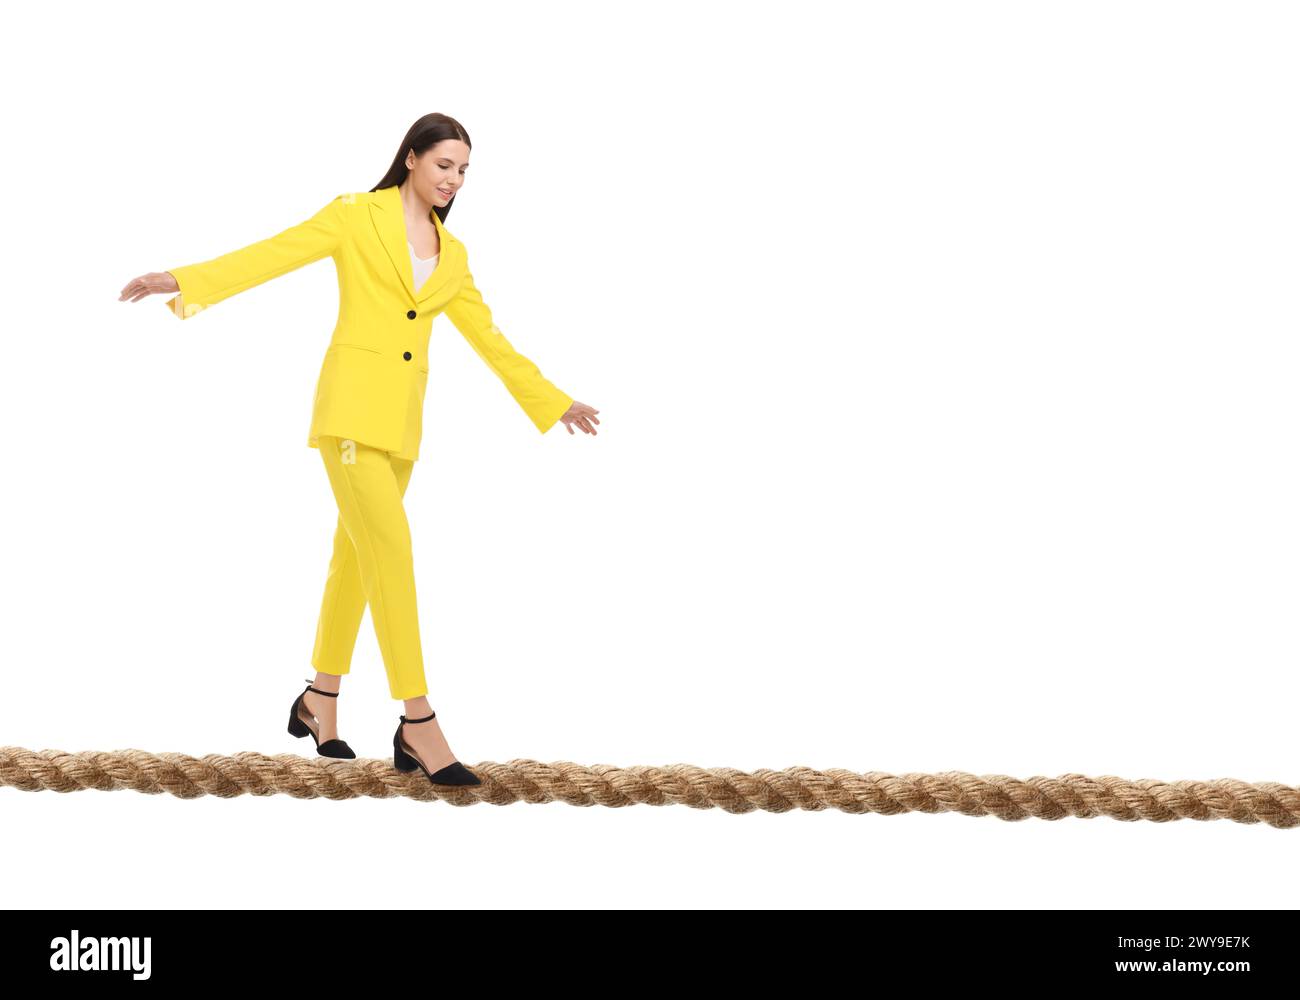 Businesswoman walking rope against white background. Risk or balance concept Stock Photo